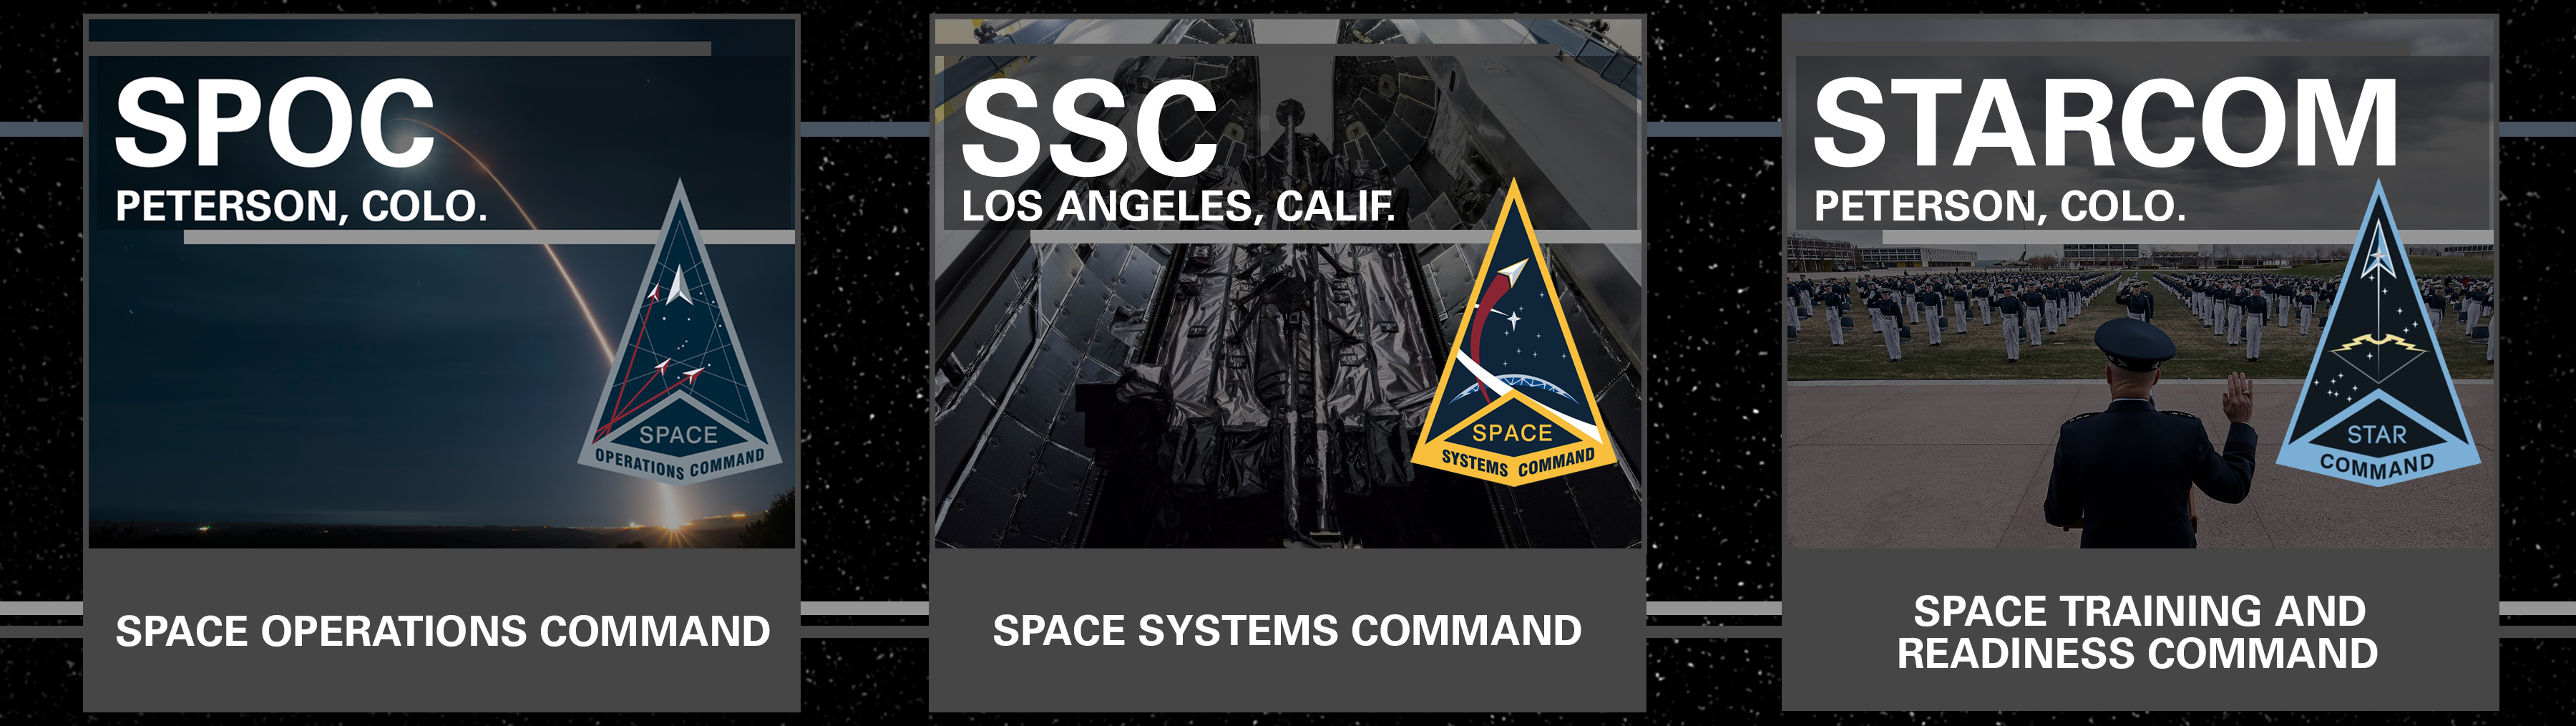 A graphic portraying three USSF commands: SPOC, SMC & StarDelta